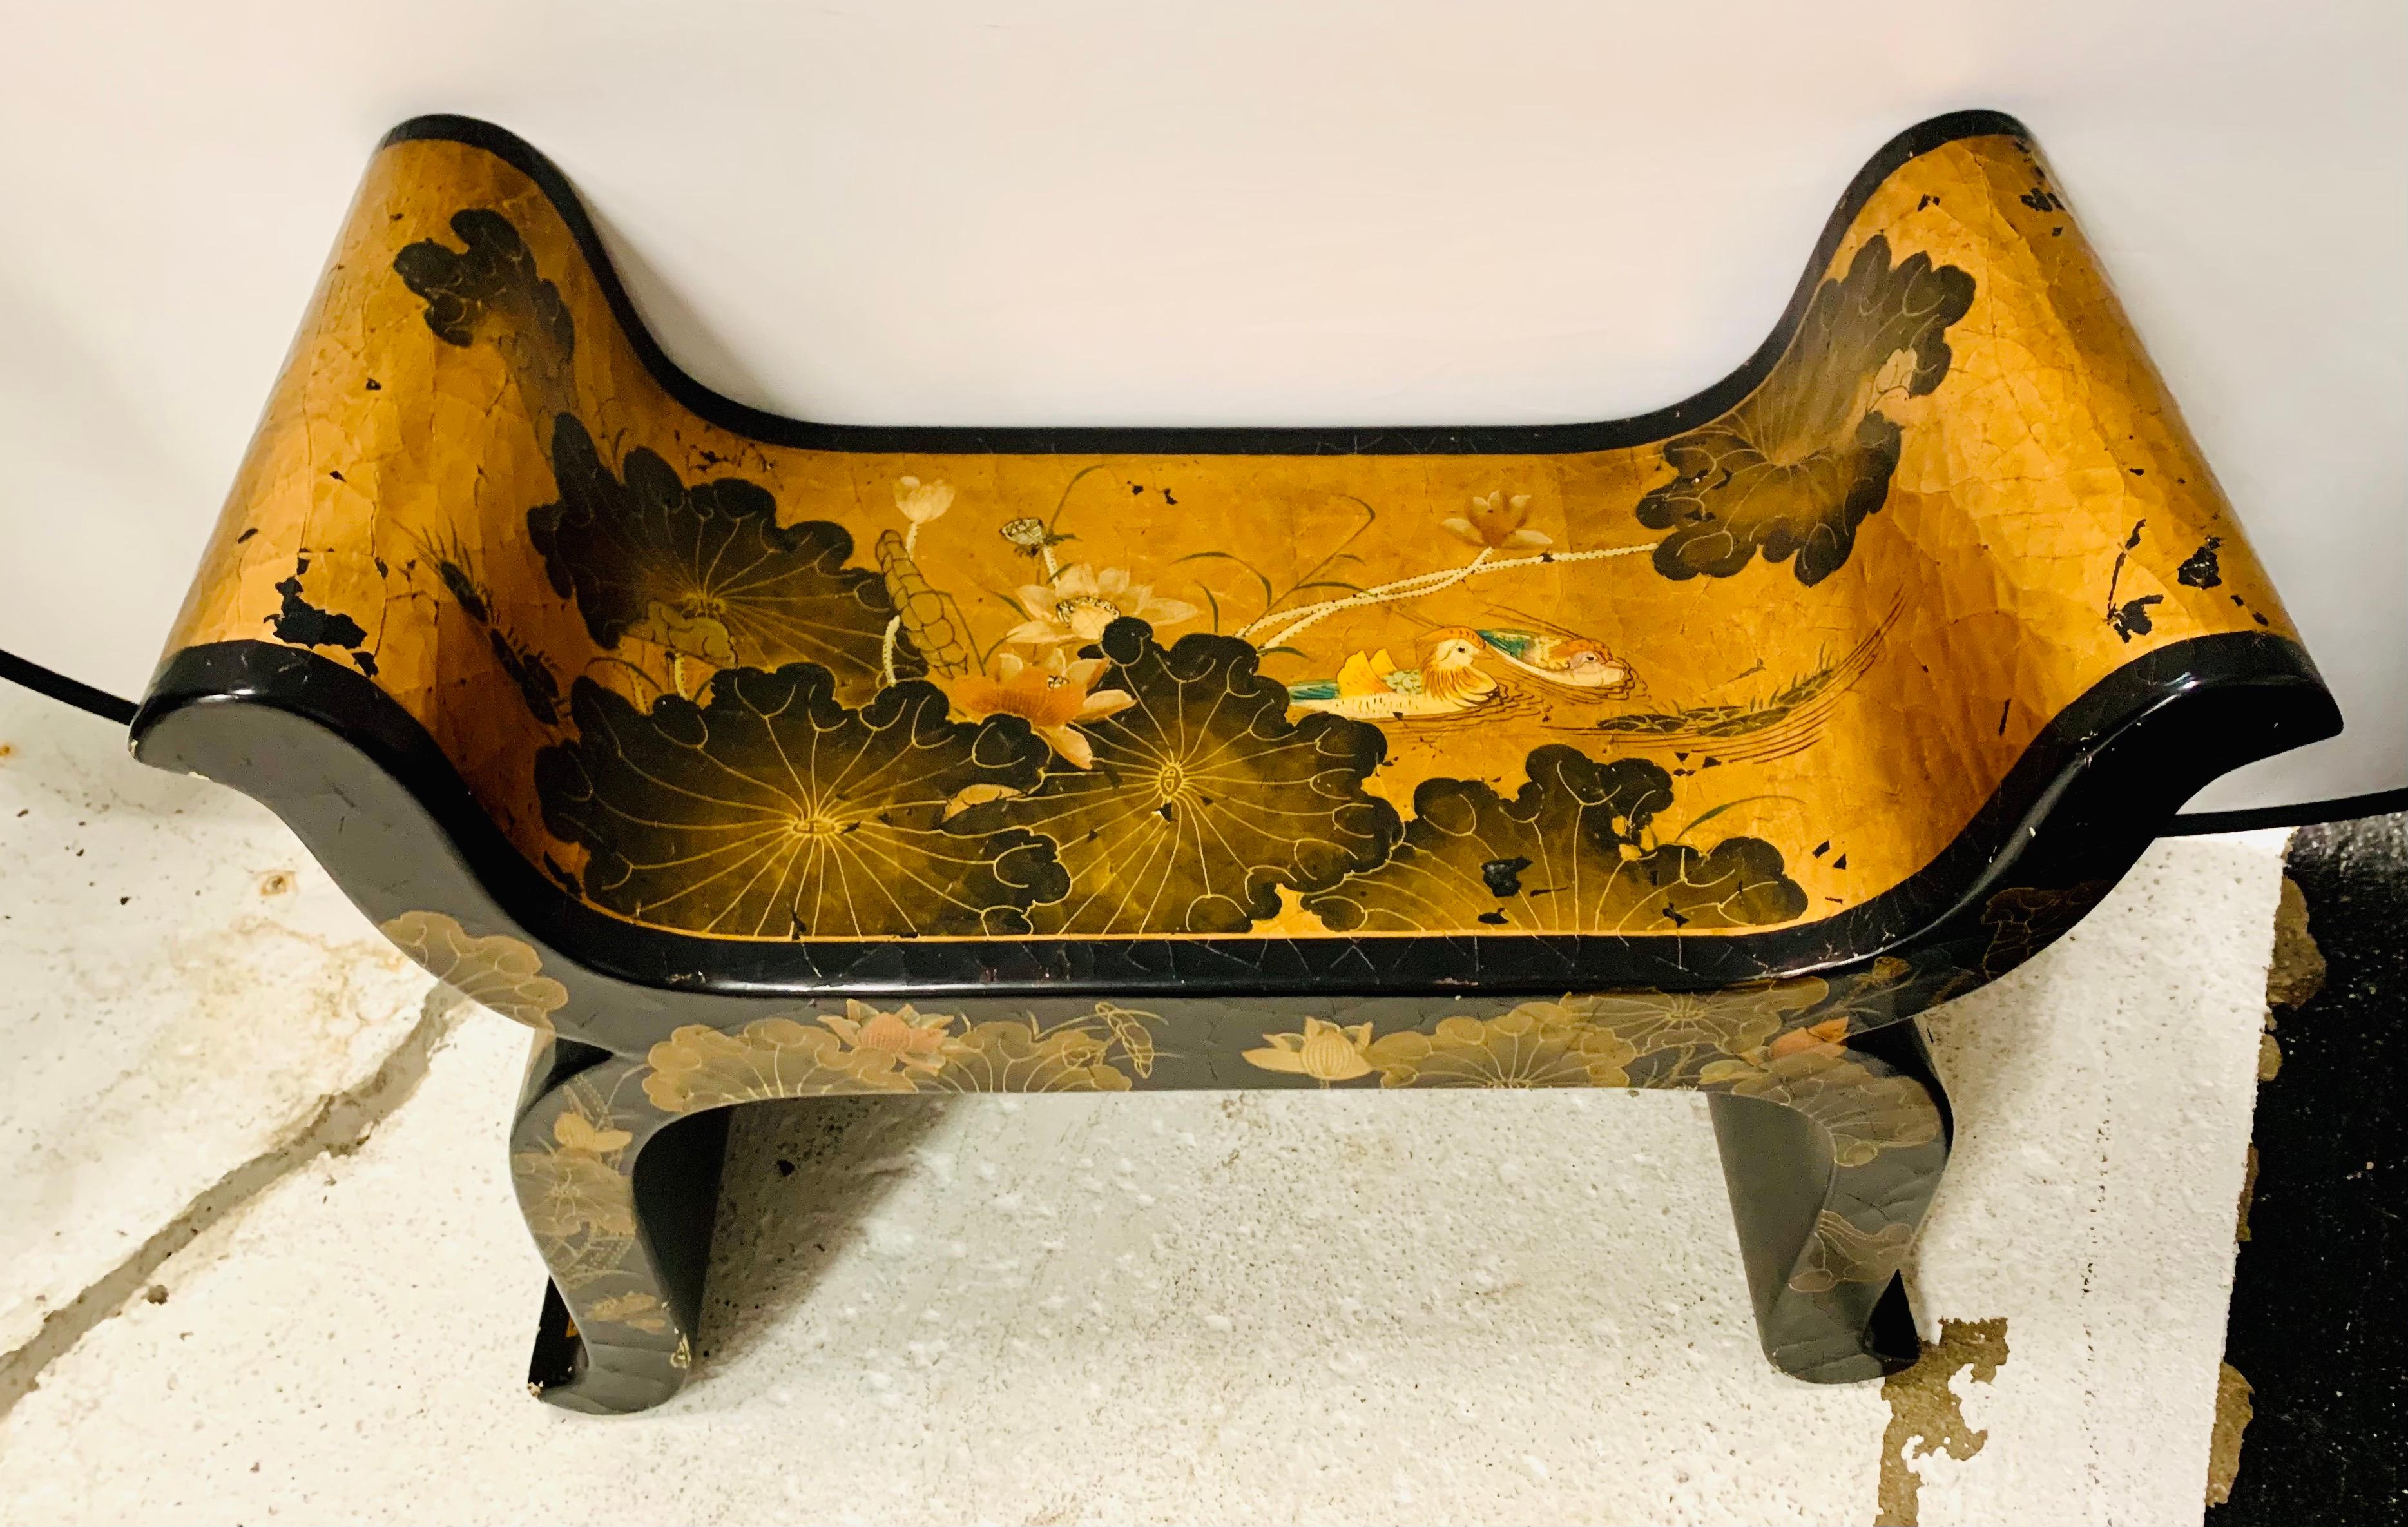 Exquisite Chinoiserie black lacquer bench with beautiful hand painted pond scenery of water lilies and ducks all on a gold leaf background.